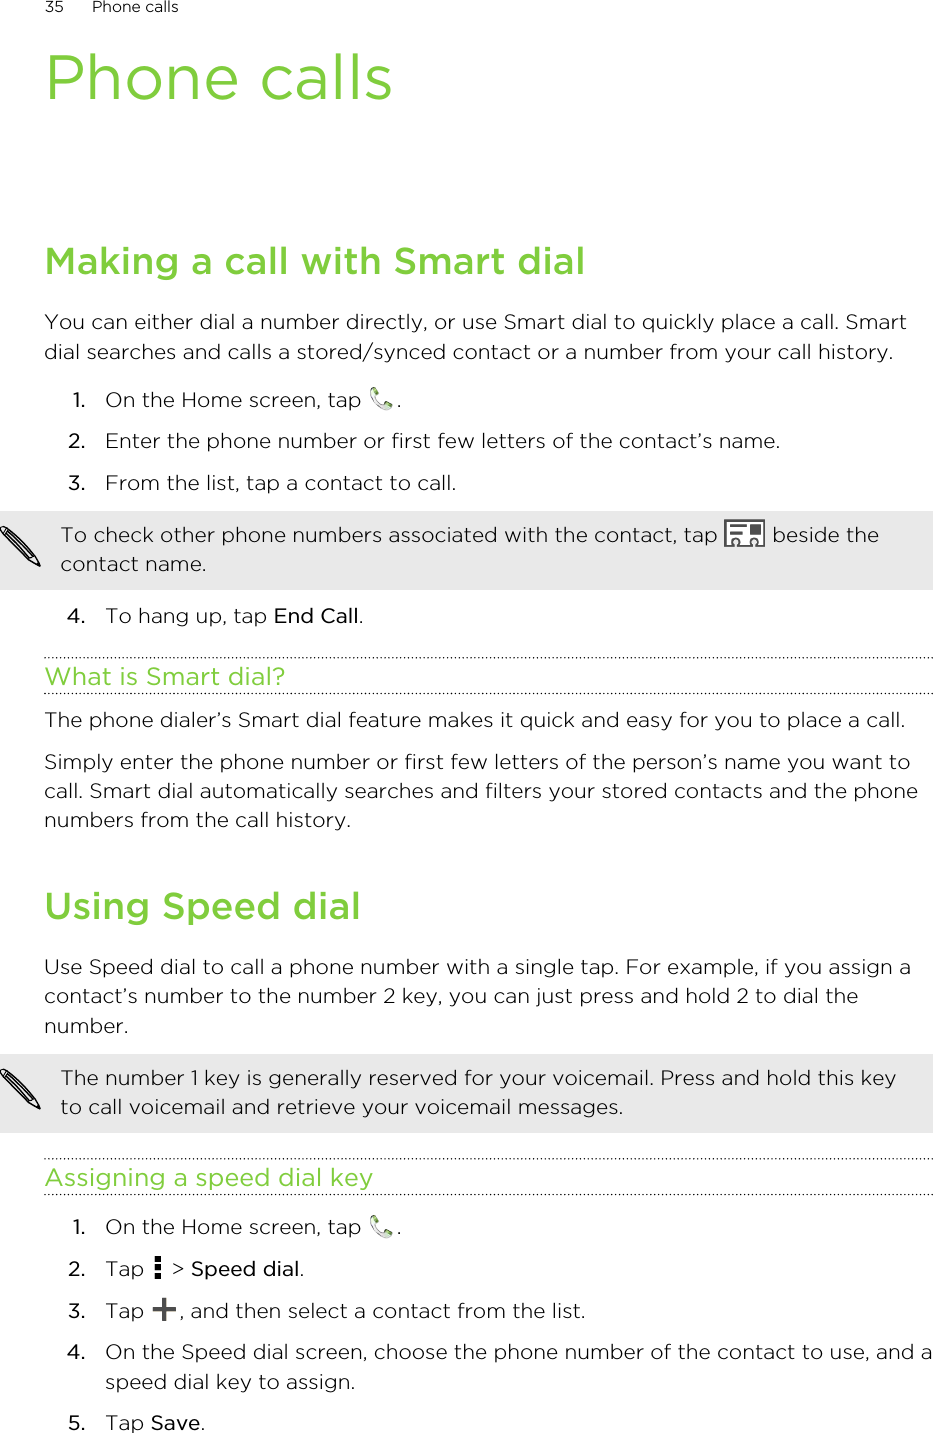 Phone callsMaking a call with Smart dialYou can either dial a number directly, or use Smart dial to quickly place a call. Smartdial searches and calls a stored/synced contact or a number from your call history.1. On the Home screen, tap  .2. Enter the phone number or first few letters of the contact’s name.3. From the list, tap a contact to call. To check other phone numbers associated with the contact, tap   beside thecontact name.4. To hang up, tap End Call.What is Smart dial?The phone dialer’s Smart dial feature makes it quick and easy for you to place a call.Simply enter the phone number or first few letters of the person’s name you want tocall. Smart dial automatically searches and filters your stored contacts and the phonenumbers from the call history.Using Speed dialUse Speed dial to call a phone number with a single tap. For example, if you assign acontact’s number to the number 2 key, you can just press and hold 2 to dial thenumber.The number 1 key is generally reserved for your voicemail. Press and hold this keyto call voicemail and retrieve your voicemail messages.Assigning a speed dial key1. On the Home screen, tap  .2. Tap   &gt; Speed dial.3. Tap  , and then select a contact from the list.4. On the Speed dial screen, choose the phone number of the contact to use, and aspeed dial key to assign.5. Tap Save.35 Phone calls